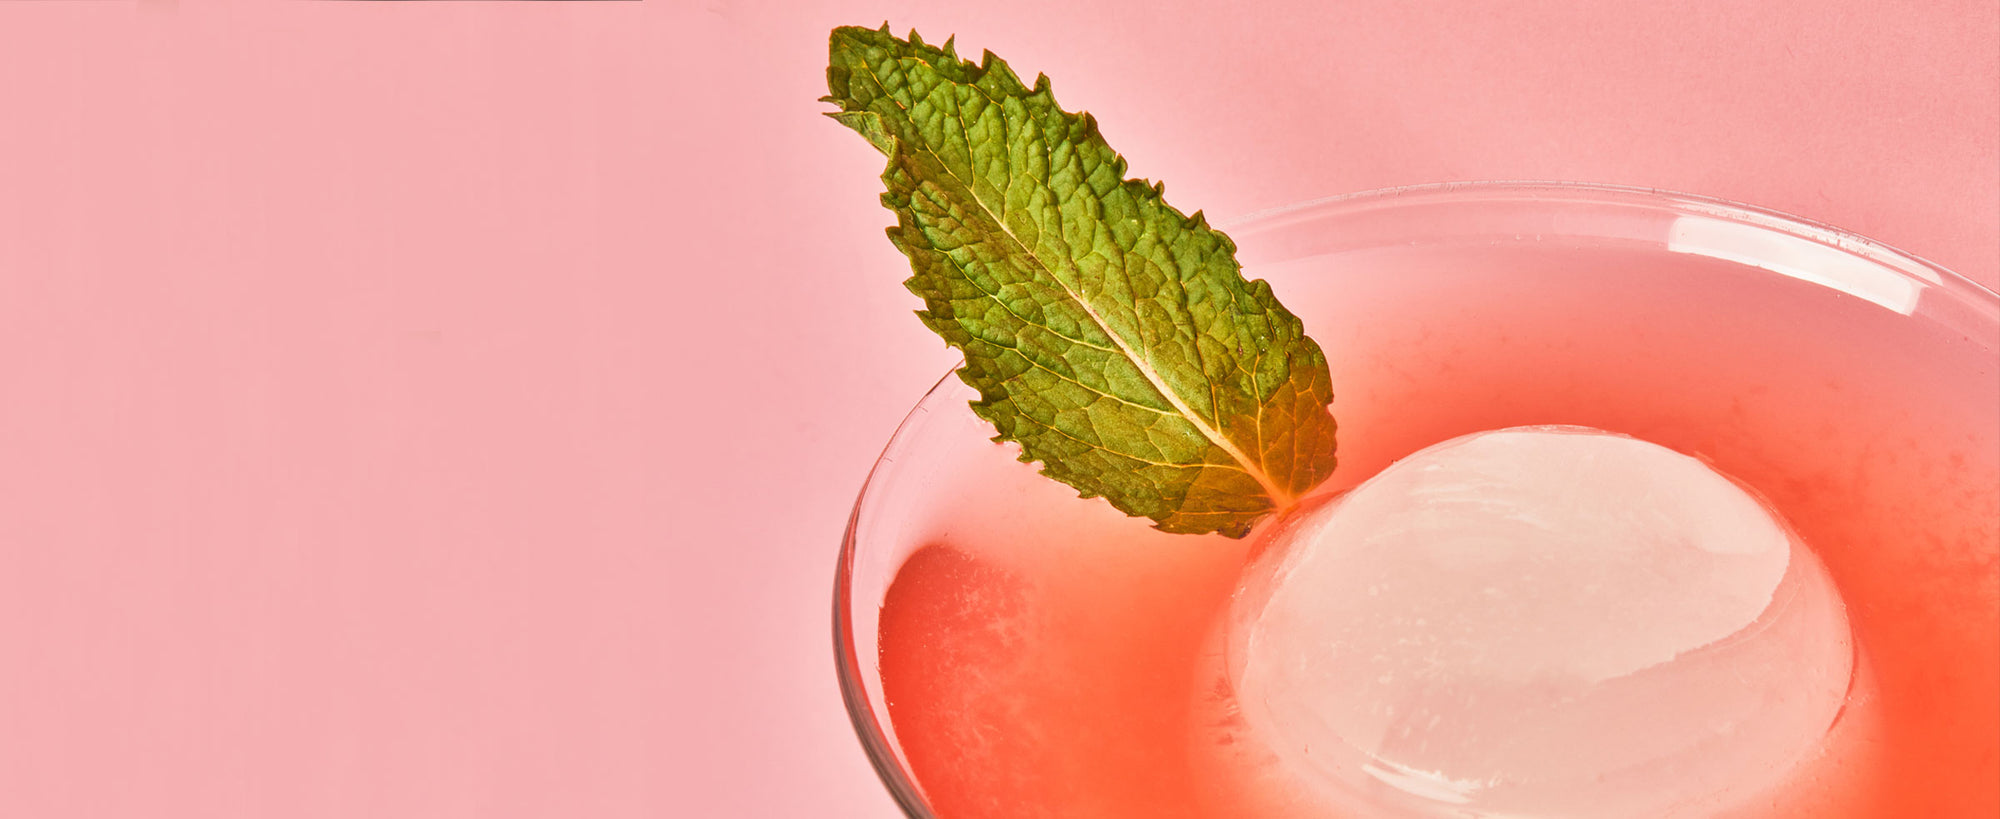 A close-up image of the Strawberry Margarita featuring a mint garnish.